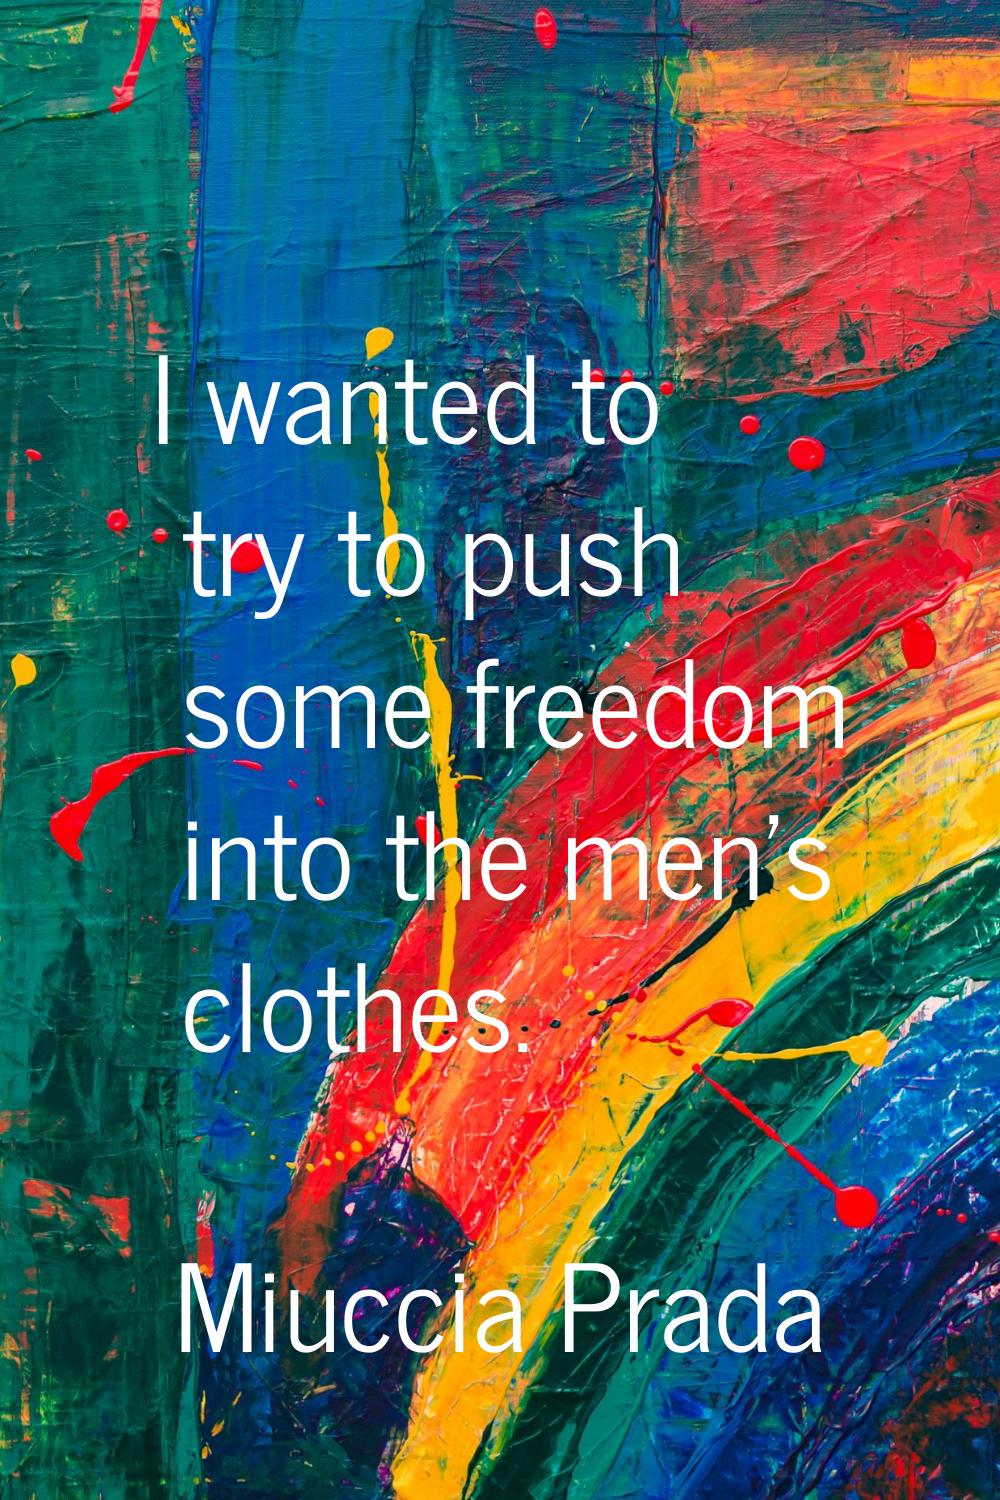 I wanted to try to push some freedom into the men's clothes.